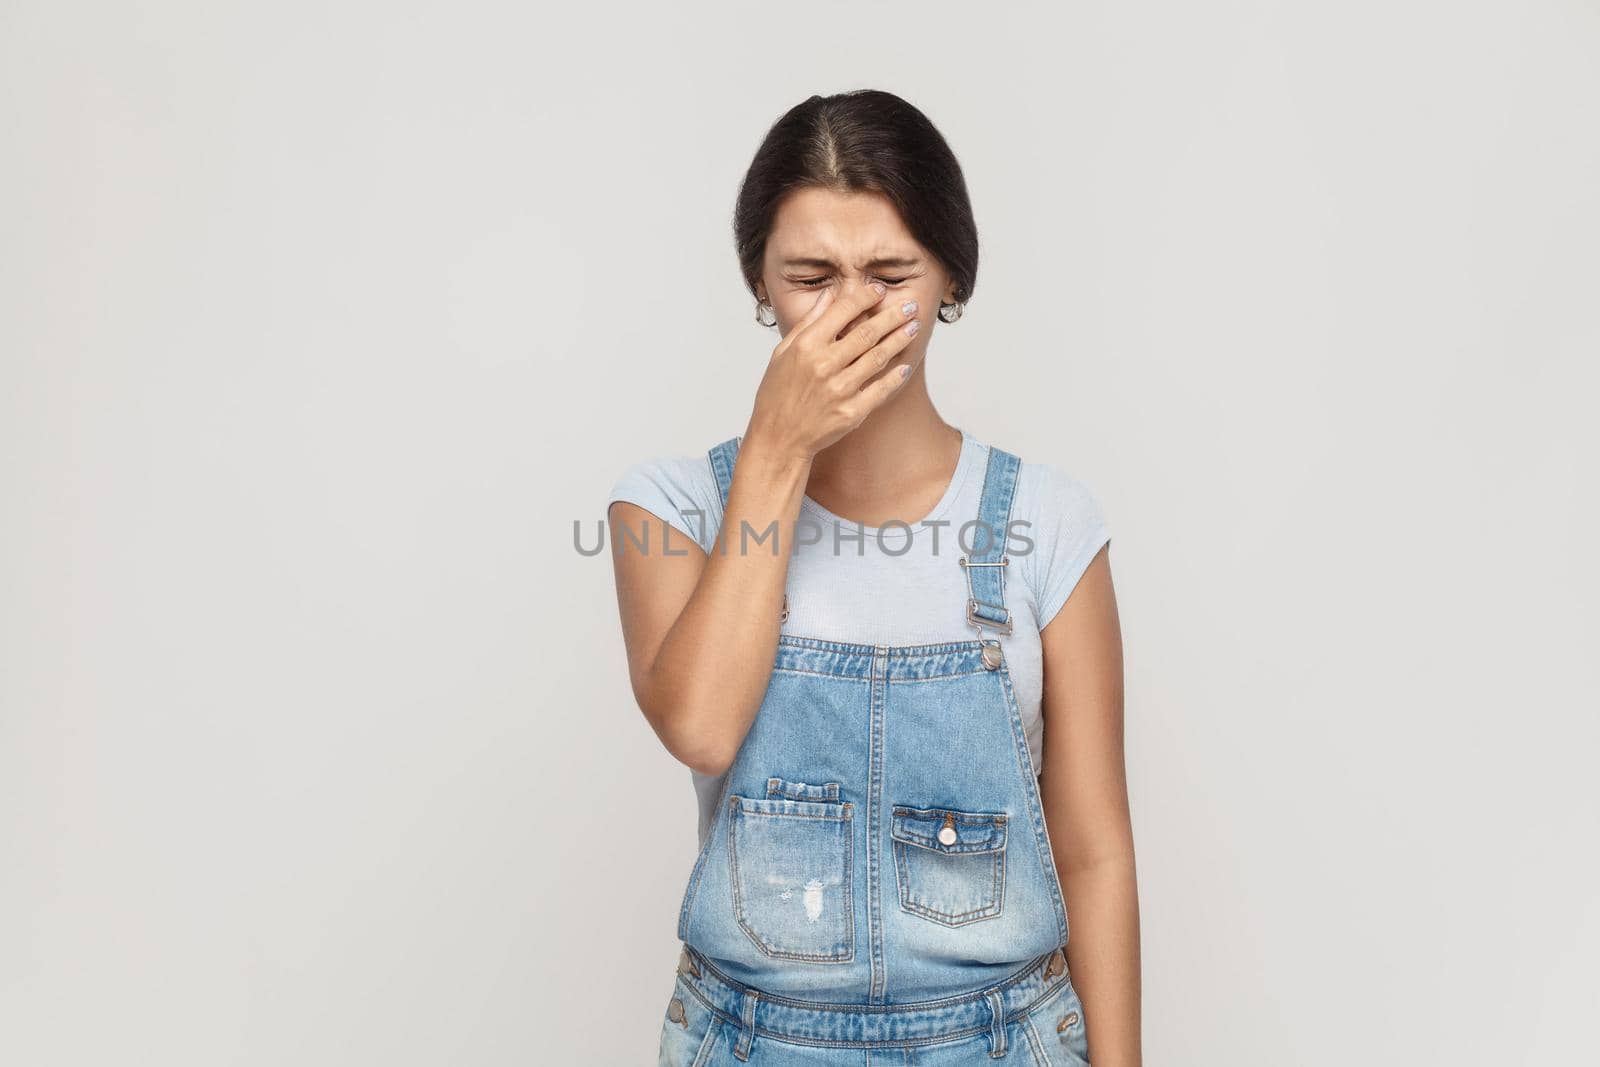 Unhappy and depressed young adult gypsy woman, feeling ashamed or sick, covering face with both hands, keeping eyes closed. Isolated studio shot on gray background.